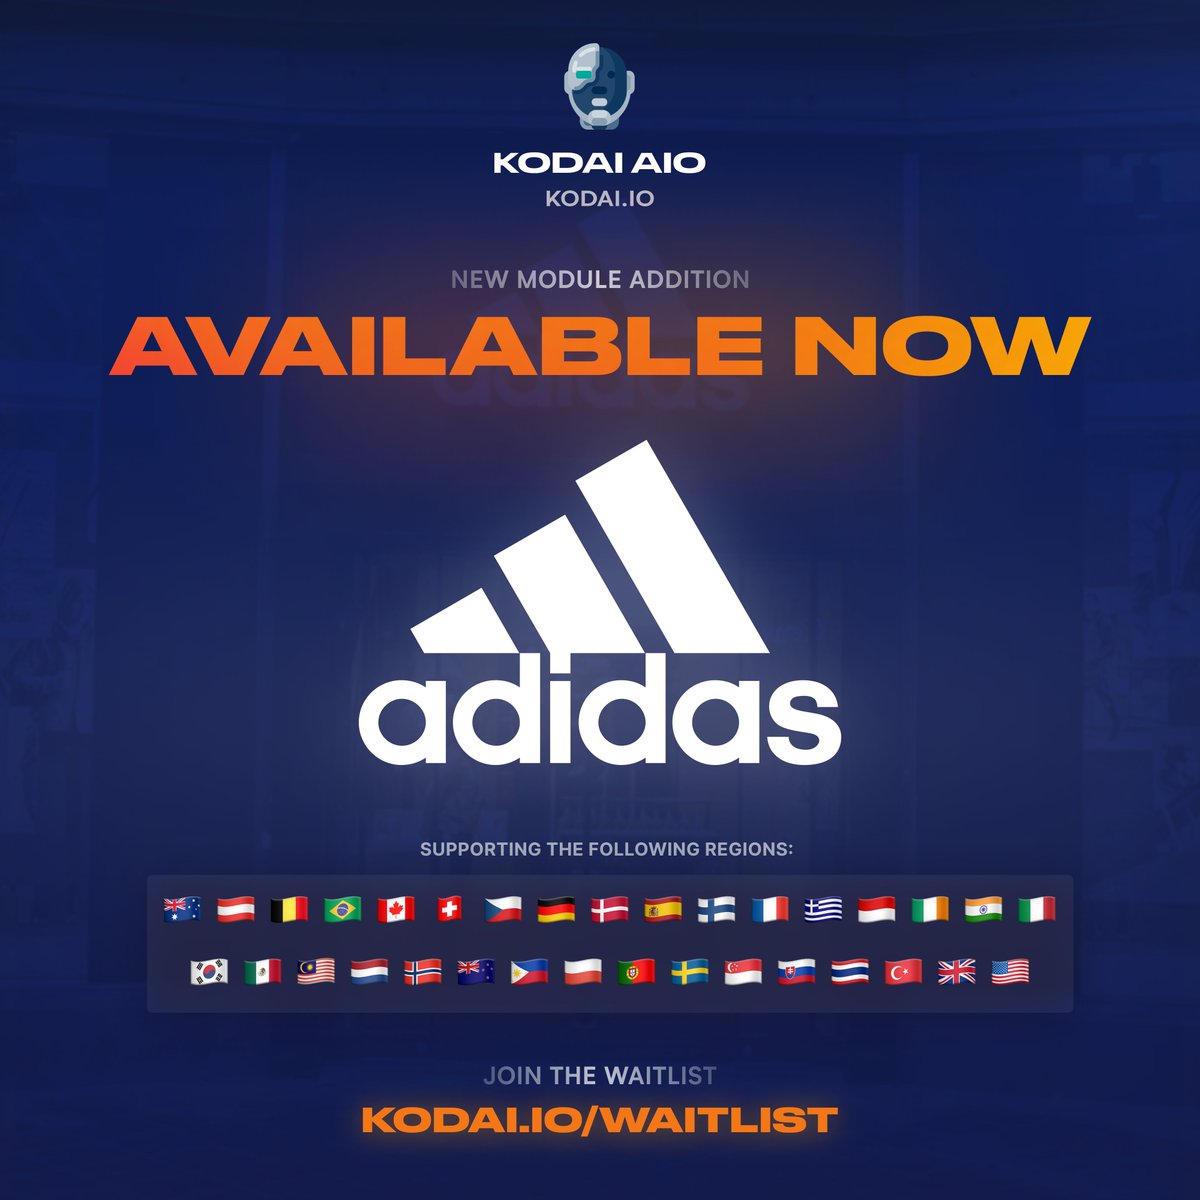 NEW SITE ALERT! ⚡️ ADIDAS has now been added to Kodai! Some notable features about the module are: 🏃‍♂️ Crazy fast checkout speeds 🌎 Supporting OVER 30 different regions 🌊 Various different game-changing techniques for SPLASH releases Don't miss out. 😉 kodai.io/waitlist